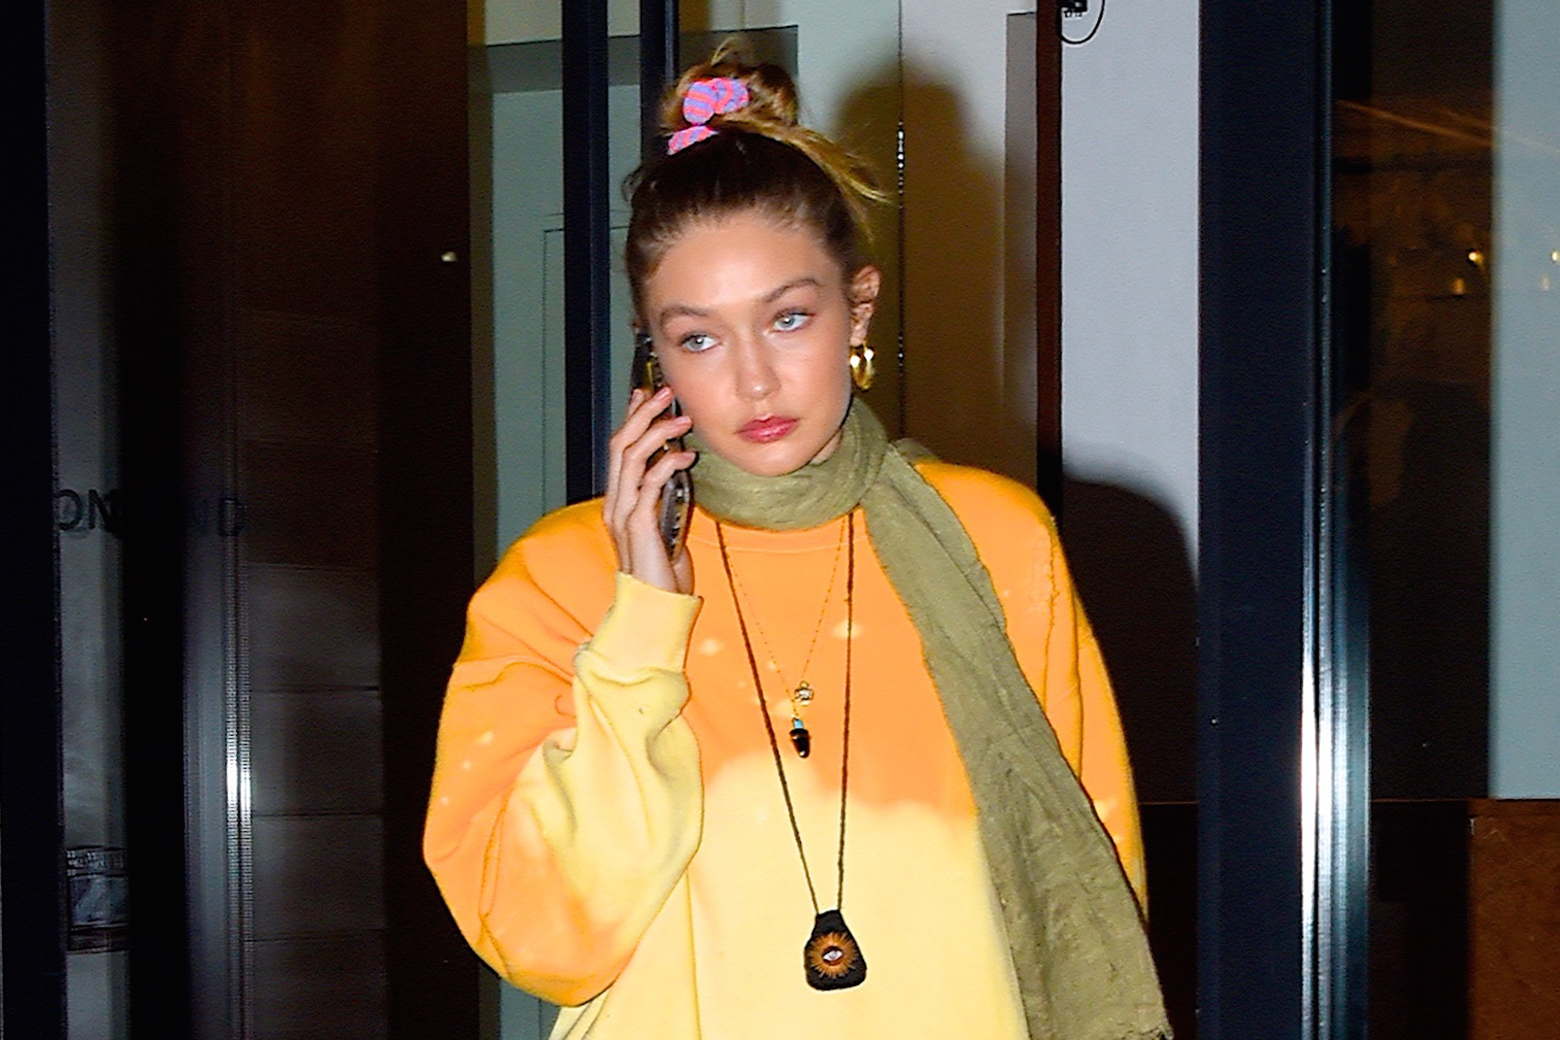 Gigi Hadid holds a cellphone to her ear.